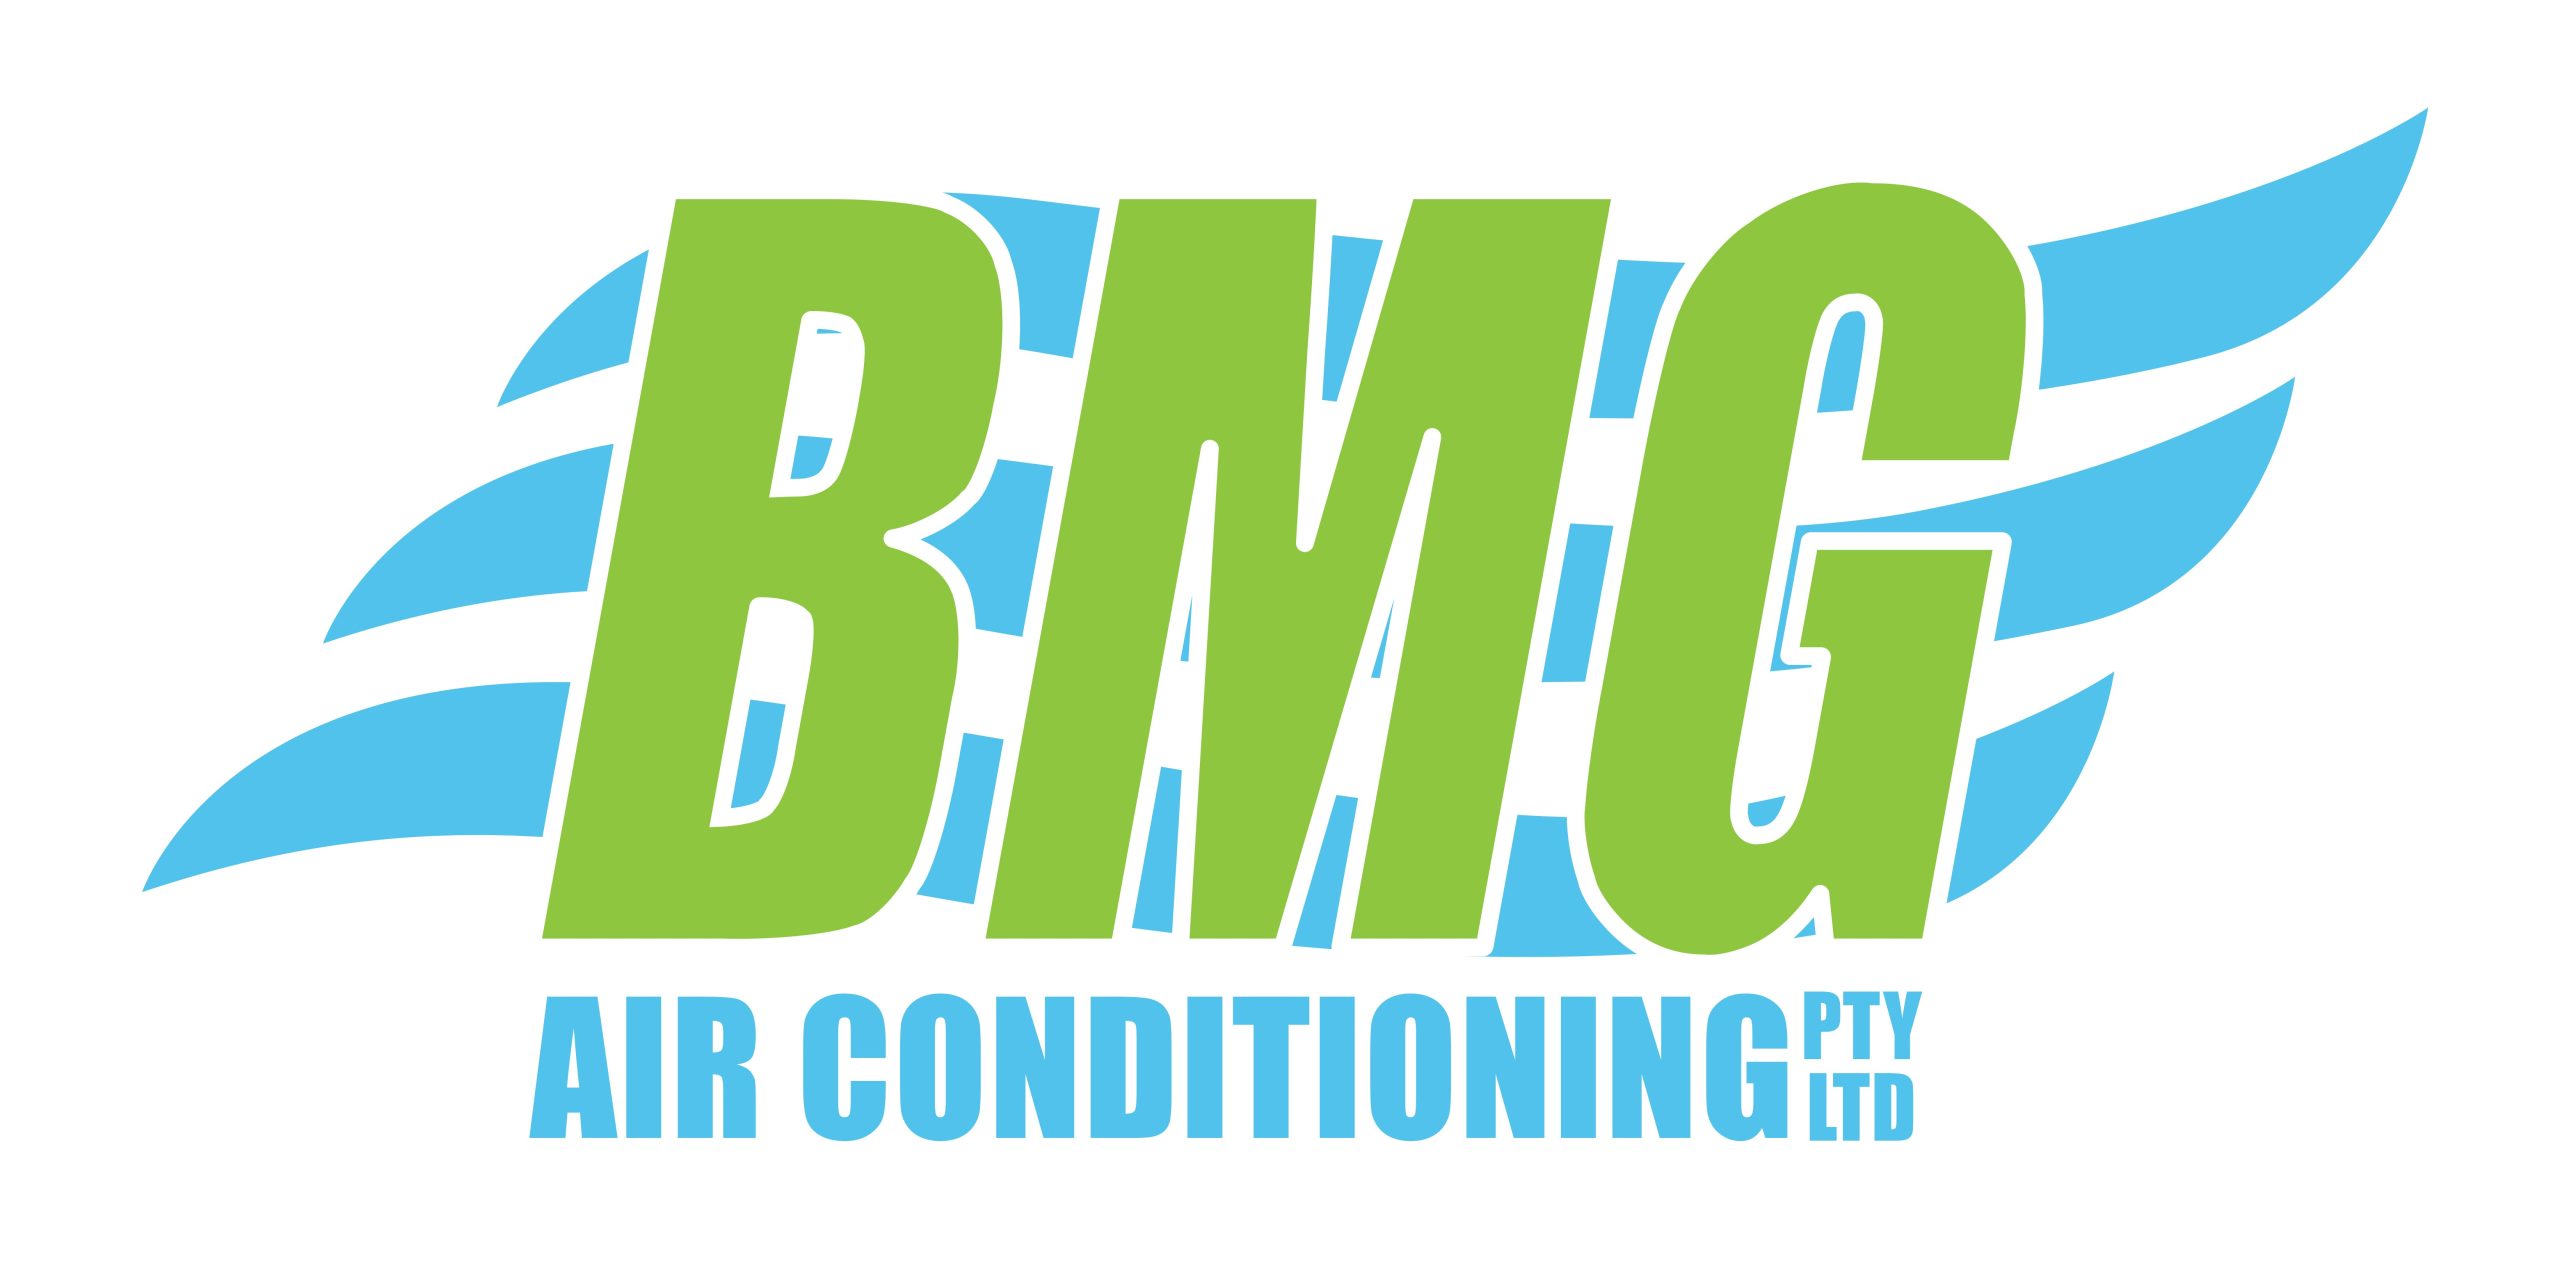 BMG Air Conditioning